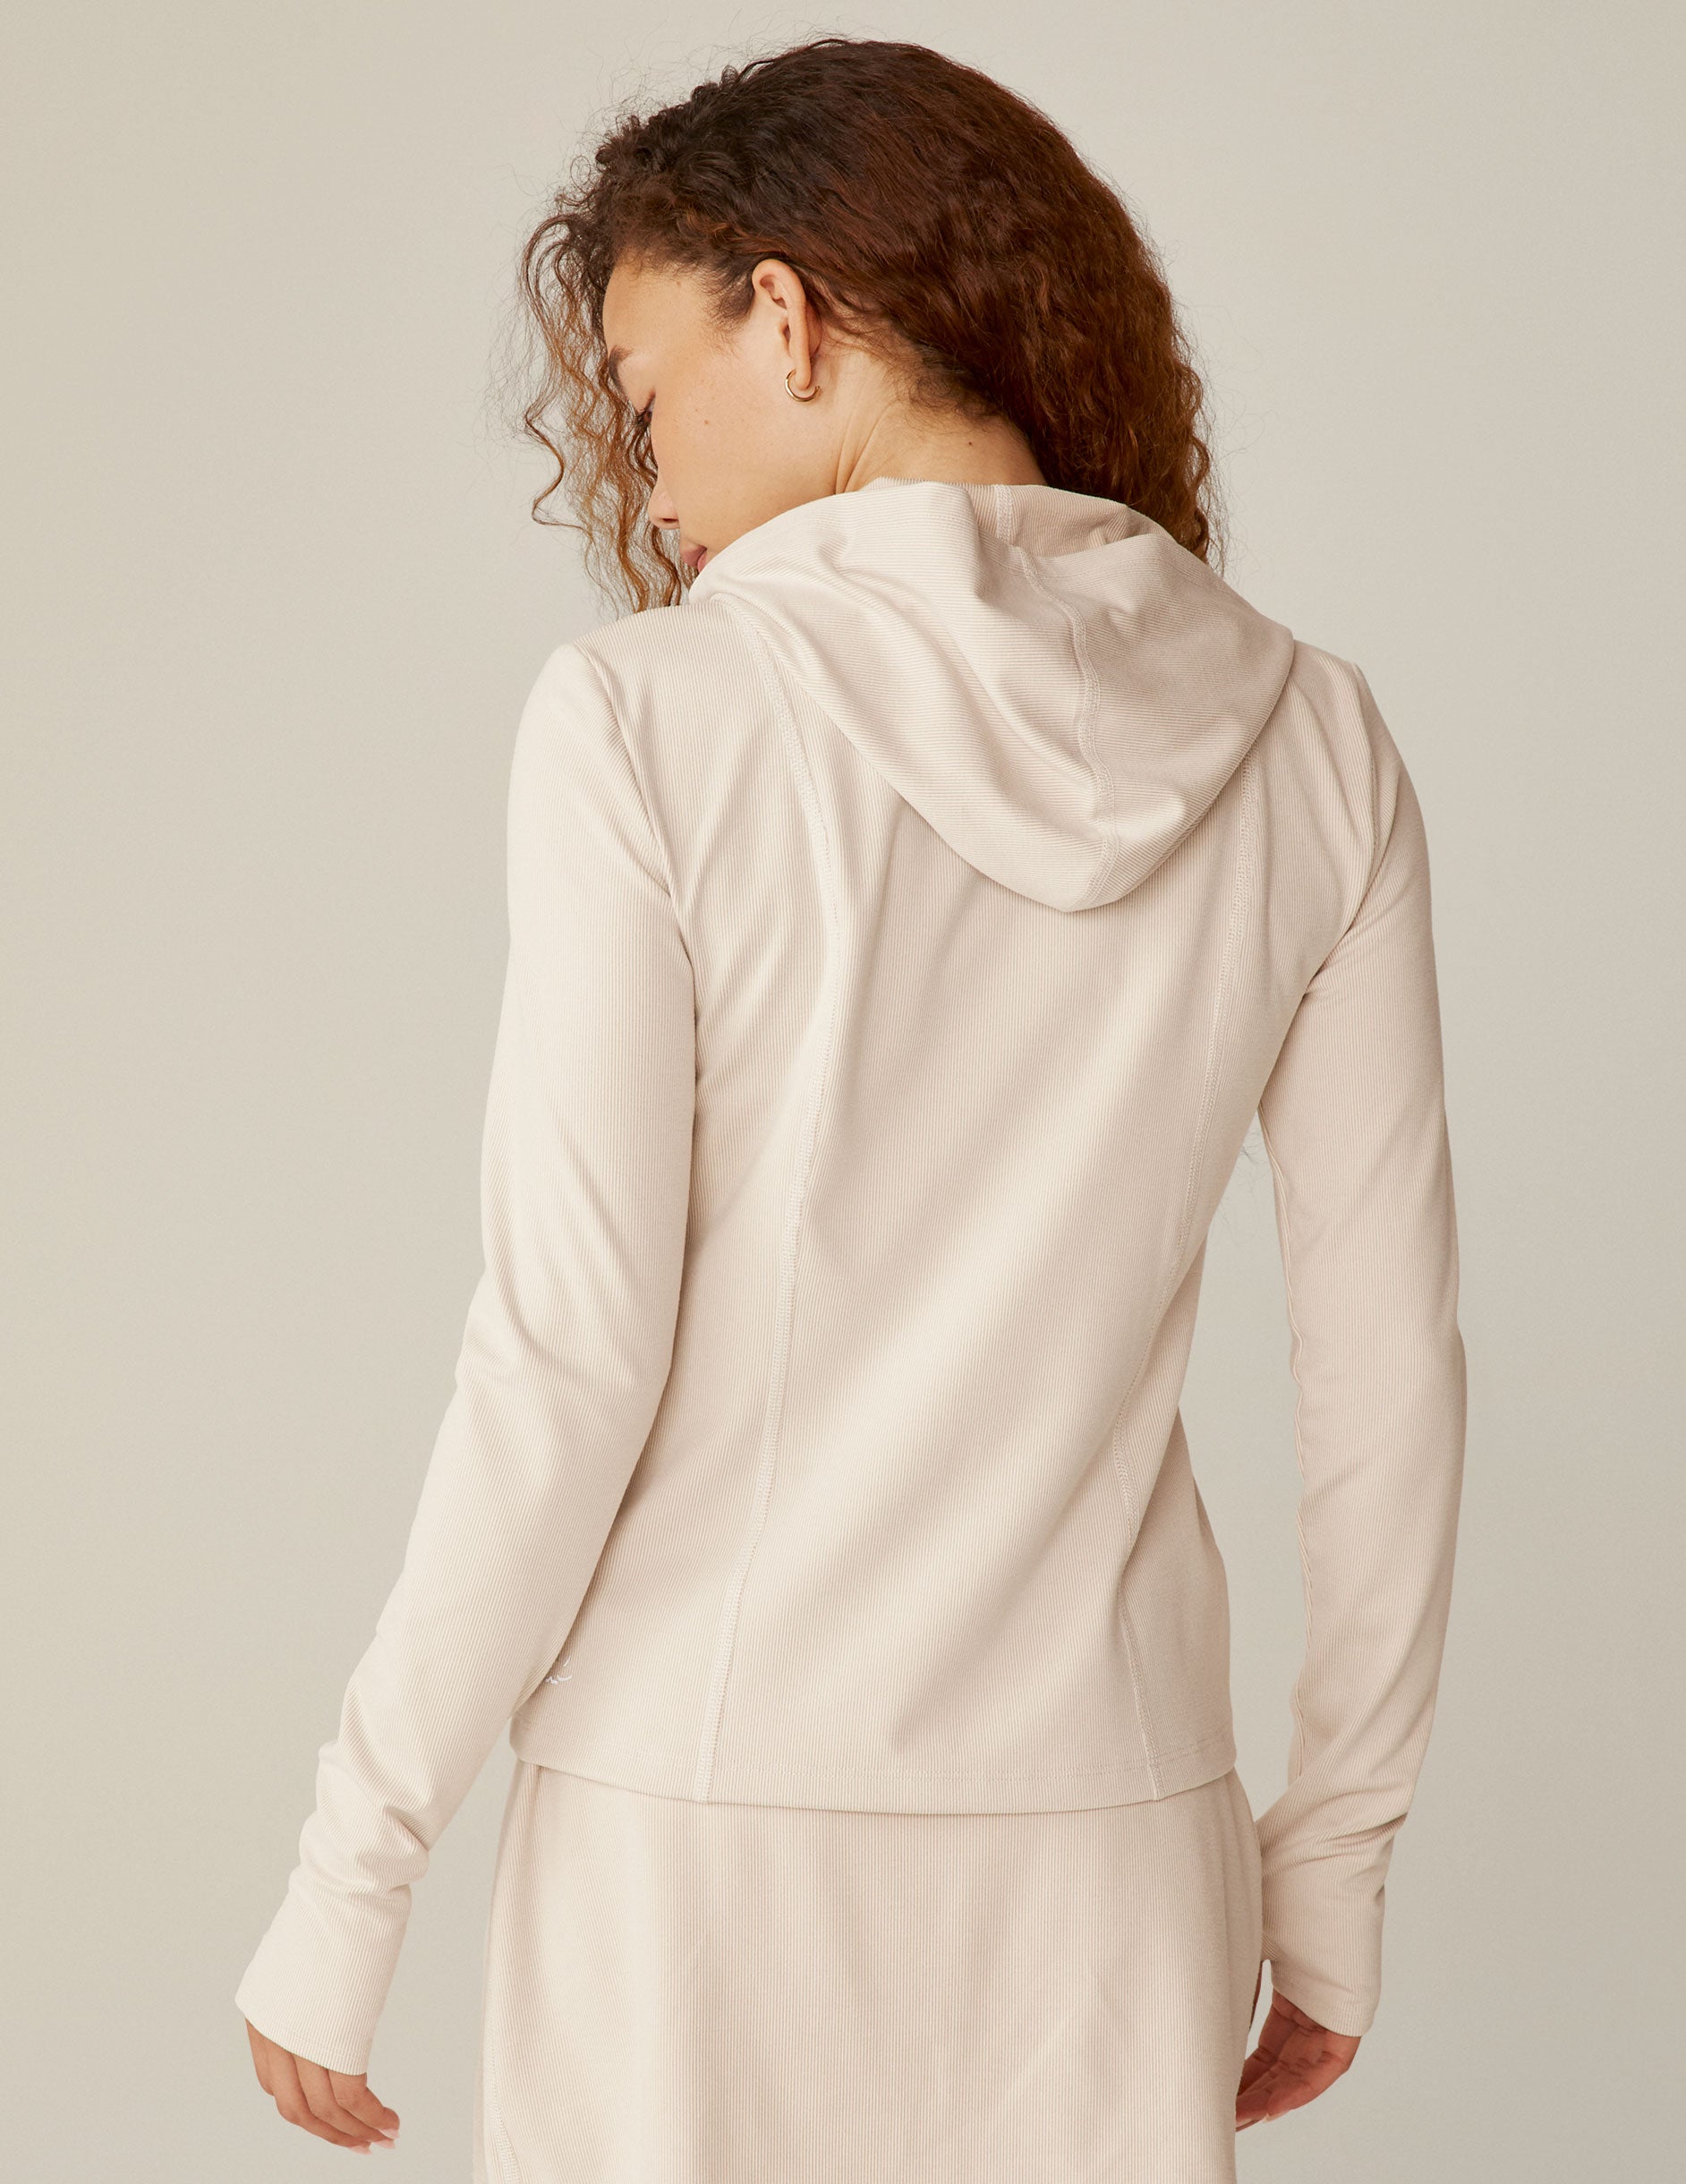 white heather rib zip-up hooded jacket with pockets. 